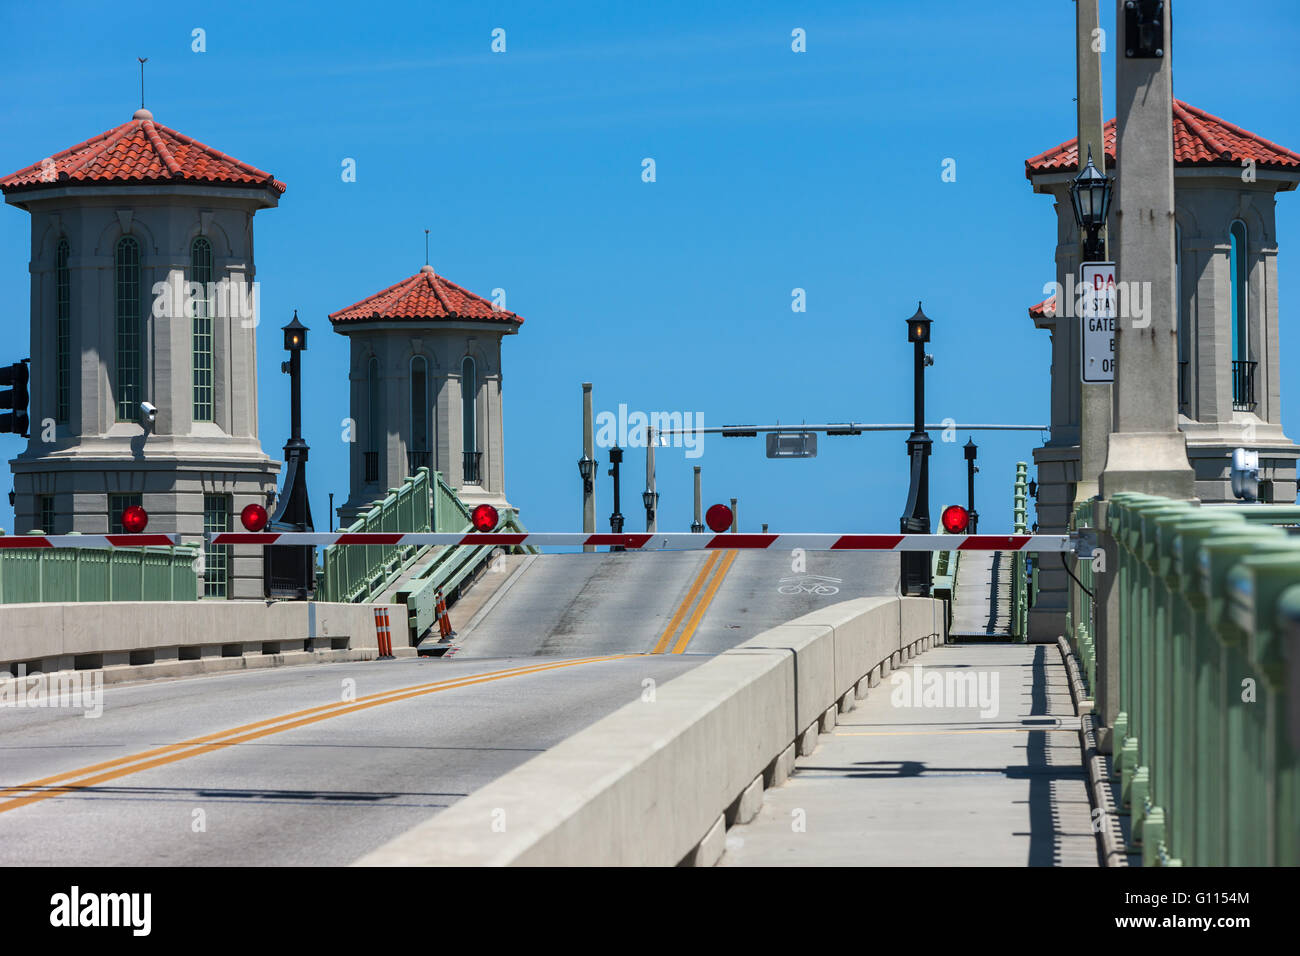 The Bridge of Lions drawbridge still partially raised after allowing a boat to pass in St. Augustine, Florida. Stock Photo